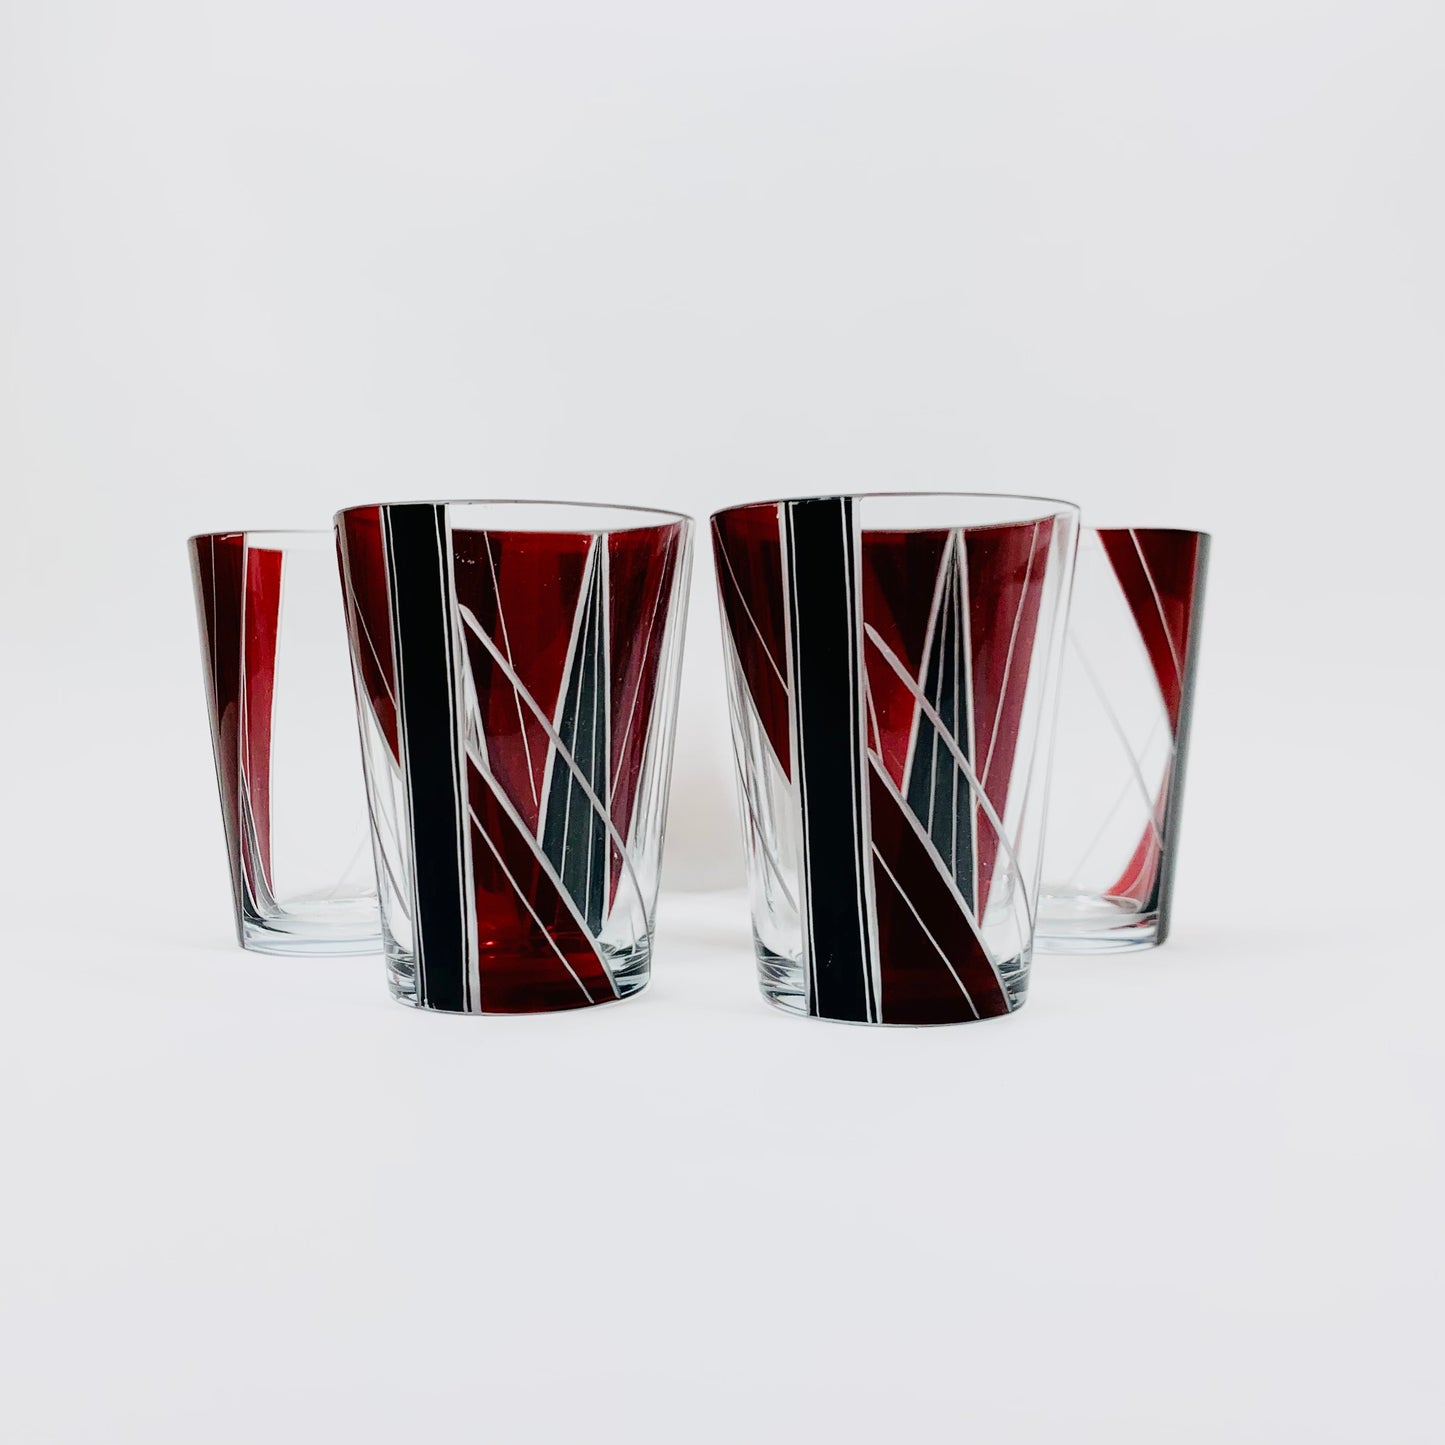 Extremely extremely rare antique Art Deco ruby and black enamel jug and matching glasses set by Karl Palda